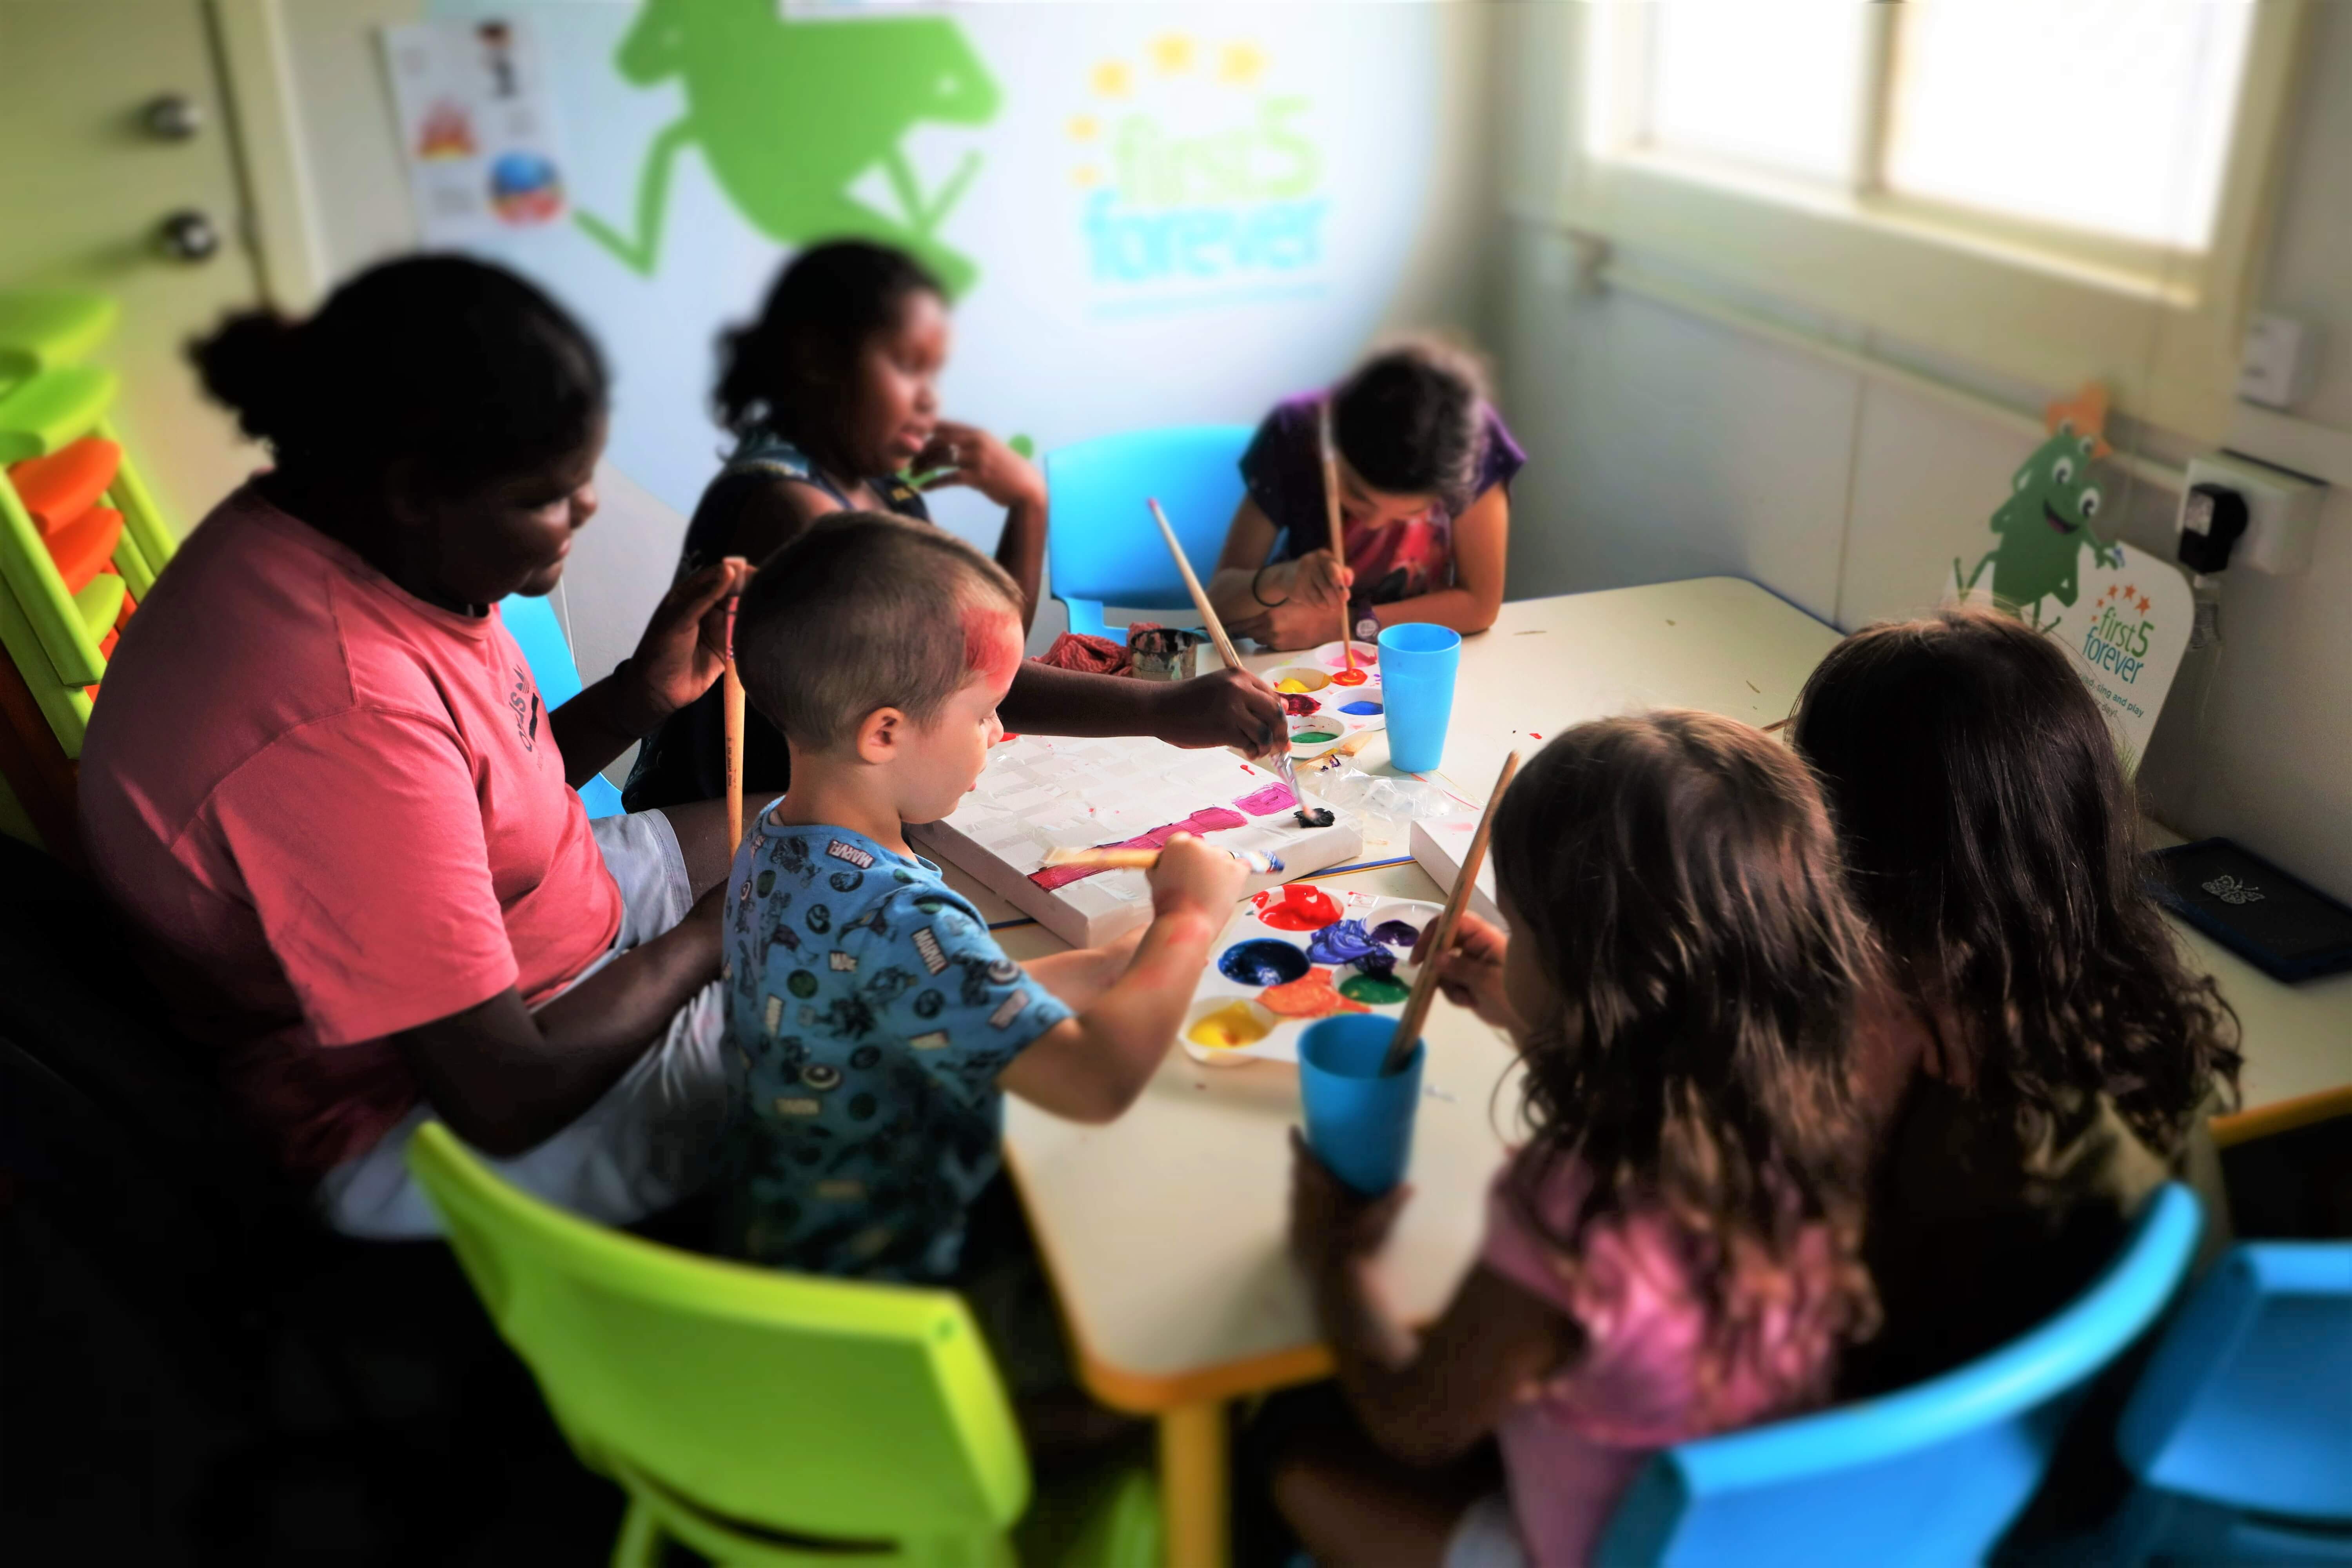 Children creating artwork for the app at the Wujal Wujal Indigenous Knowledge Centre